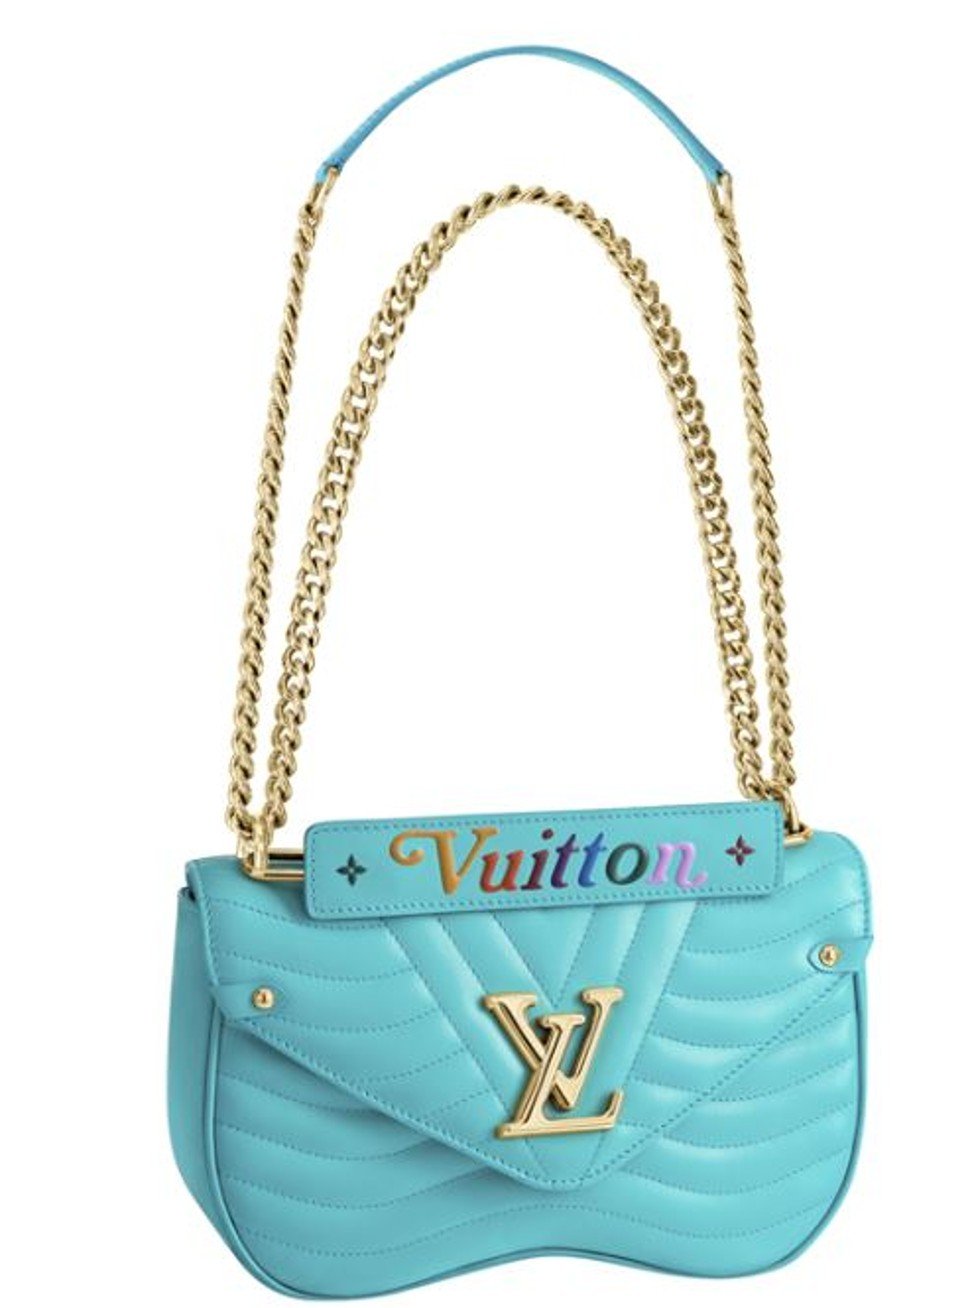 STYLE Edit: Louis Vuitton's youthful, vibrant New Wave bag